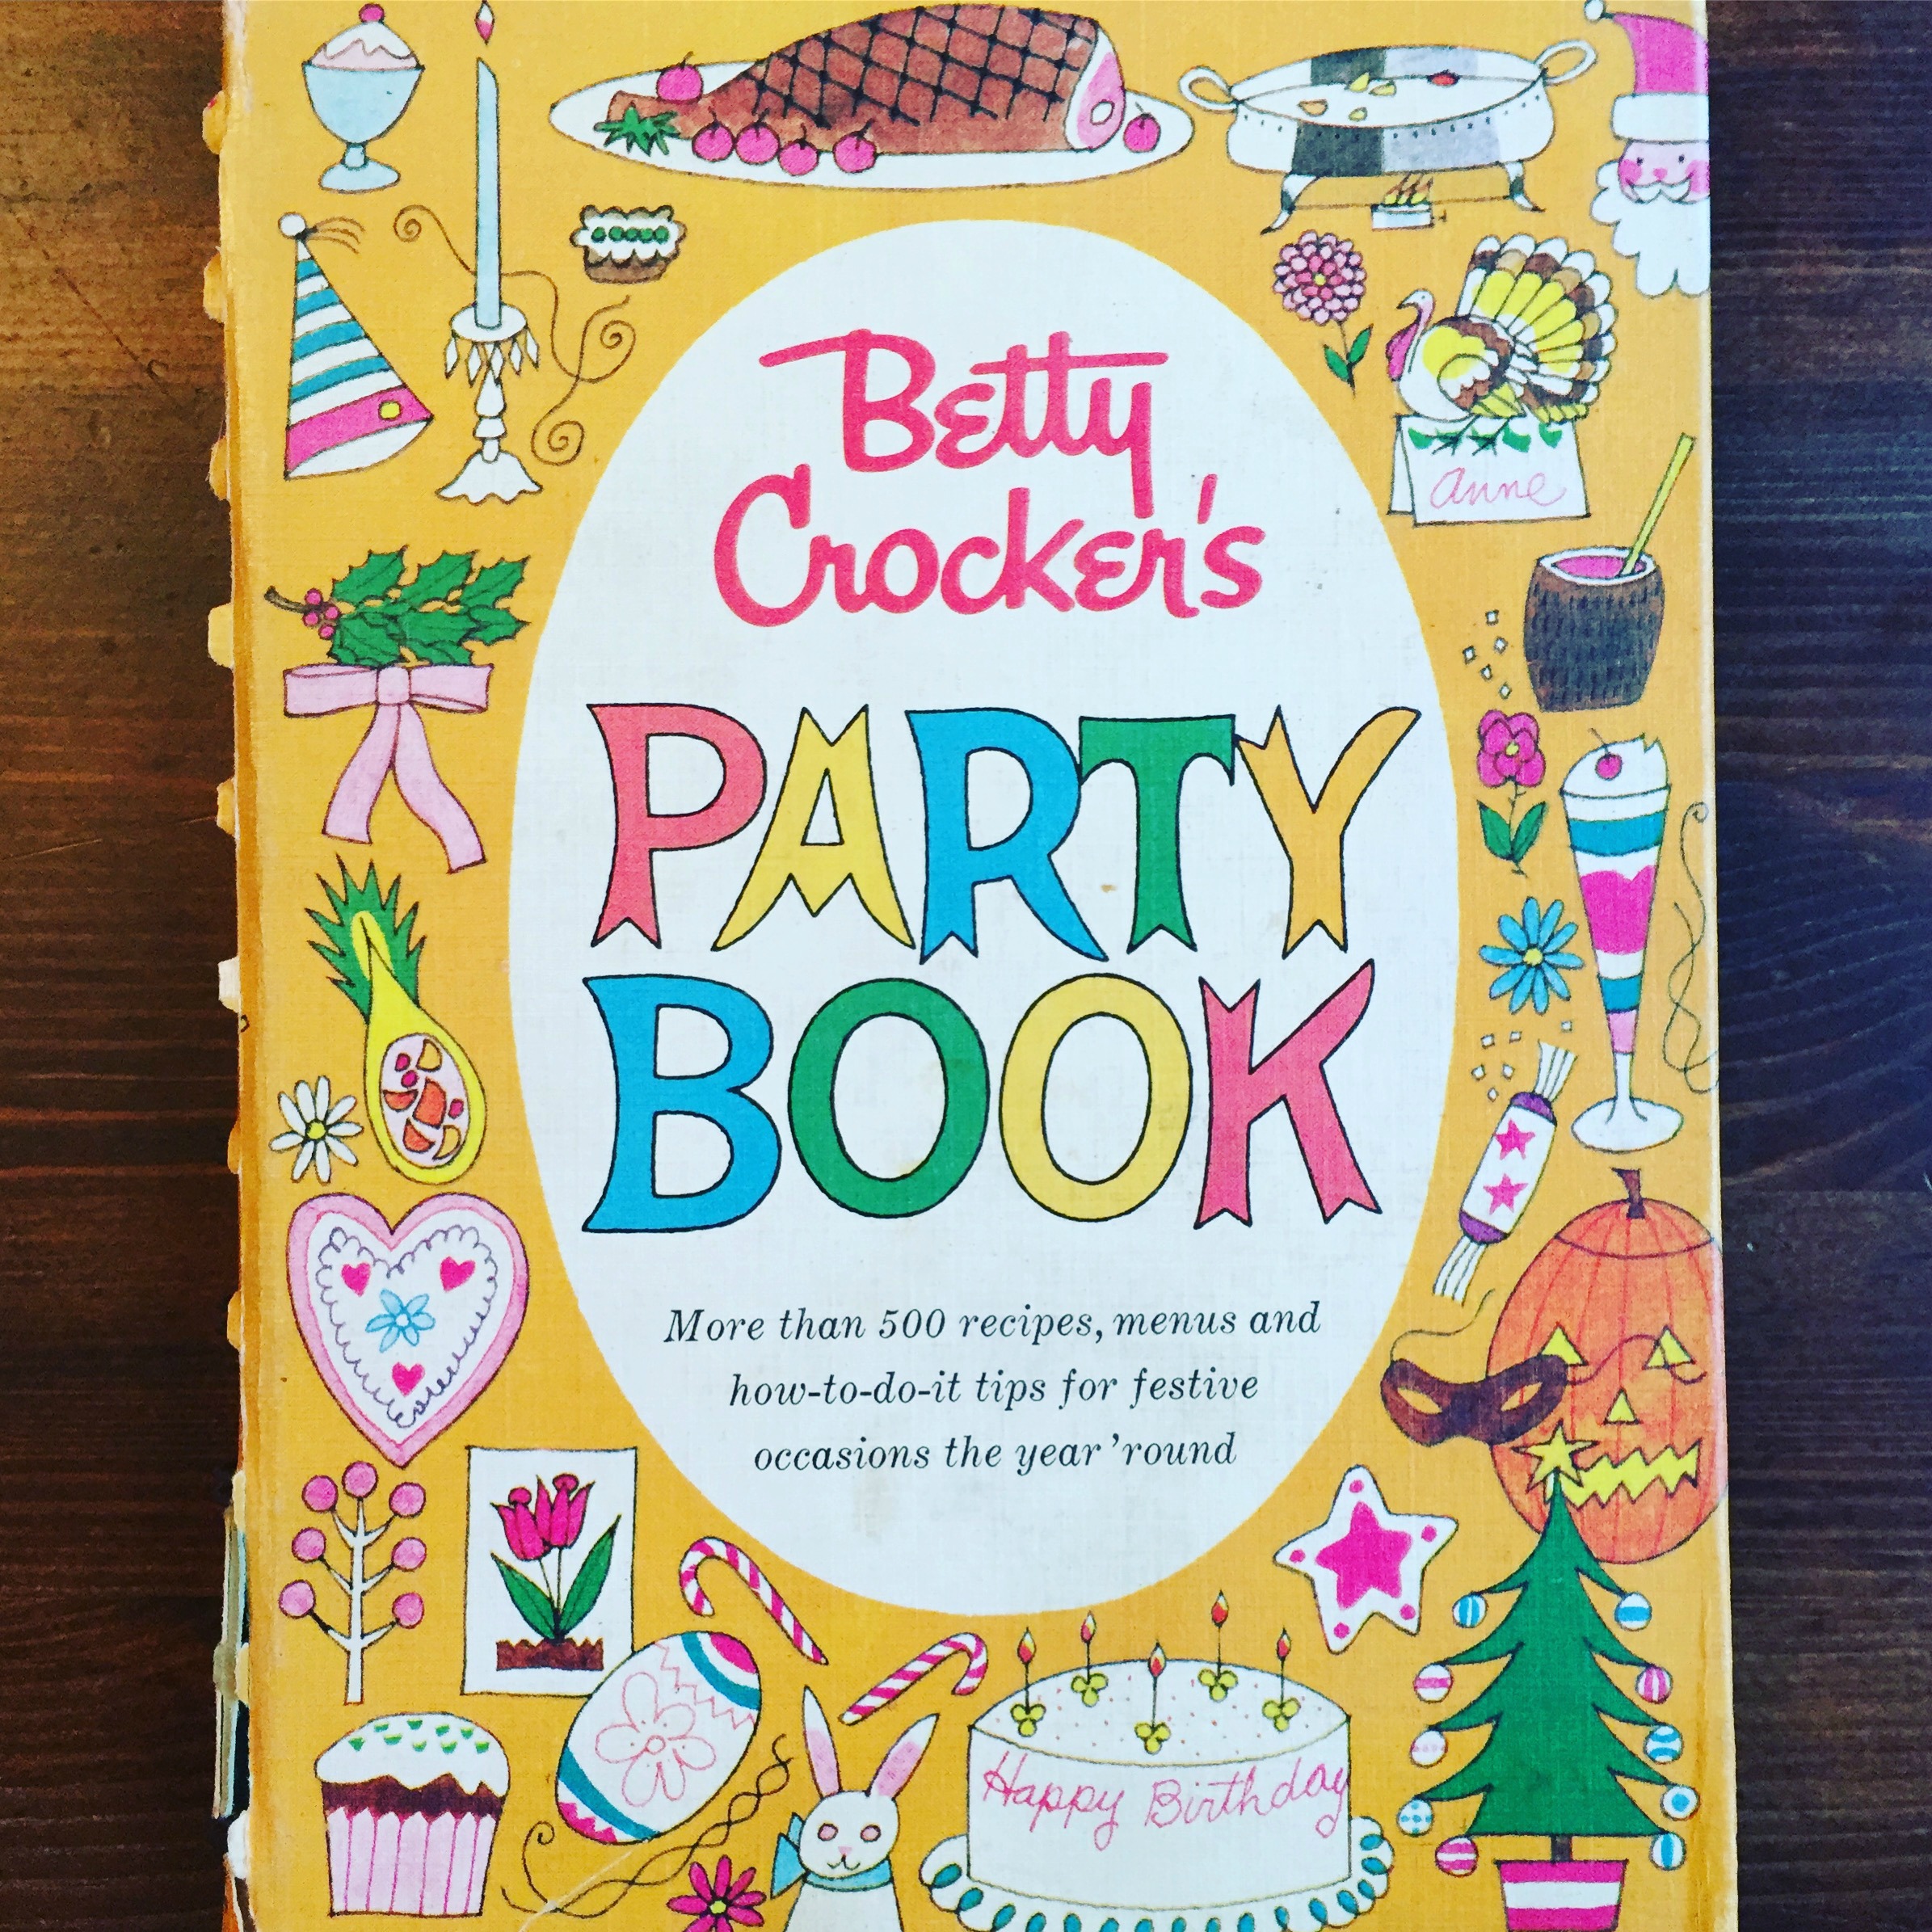 Betty Crockers Party Book Is A Vintage Treasure Trove Of Party Ideas